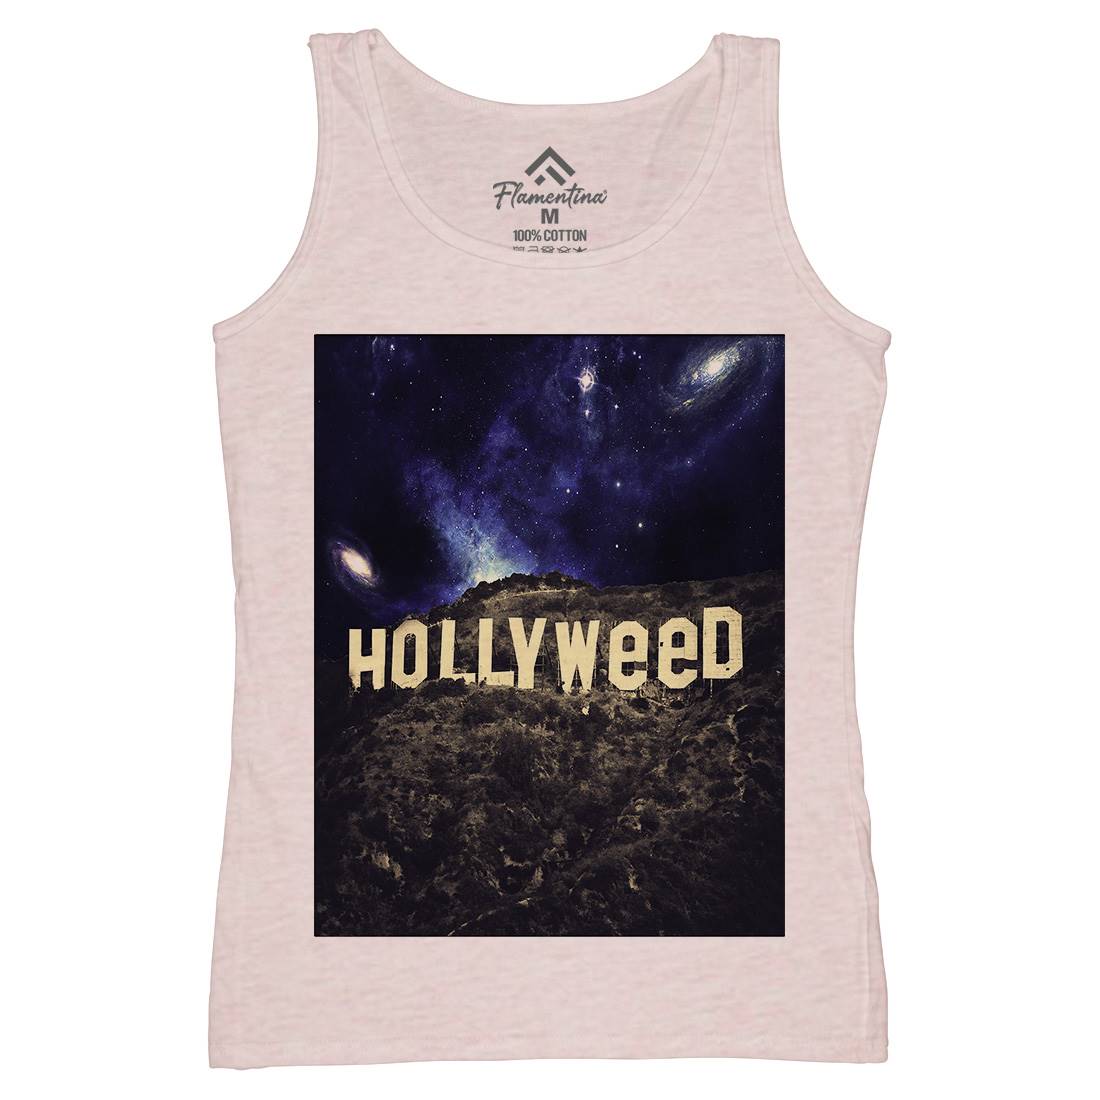 Hollyweed Womens Organic Tank Top Vest Space A847